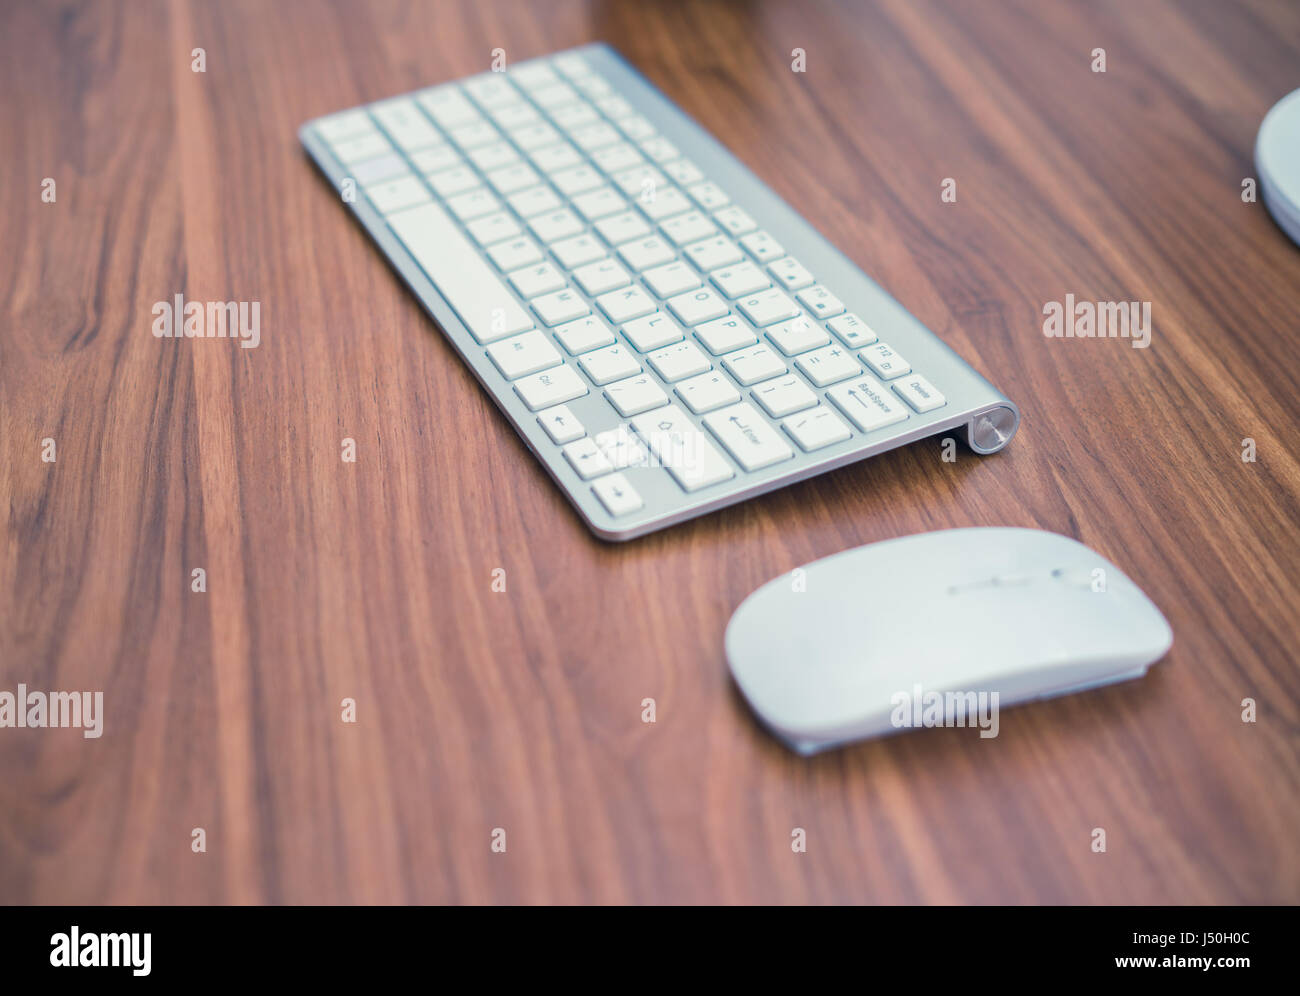 White wireless keyboard and wireless mouse on the wooden table Stock Photo